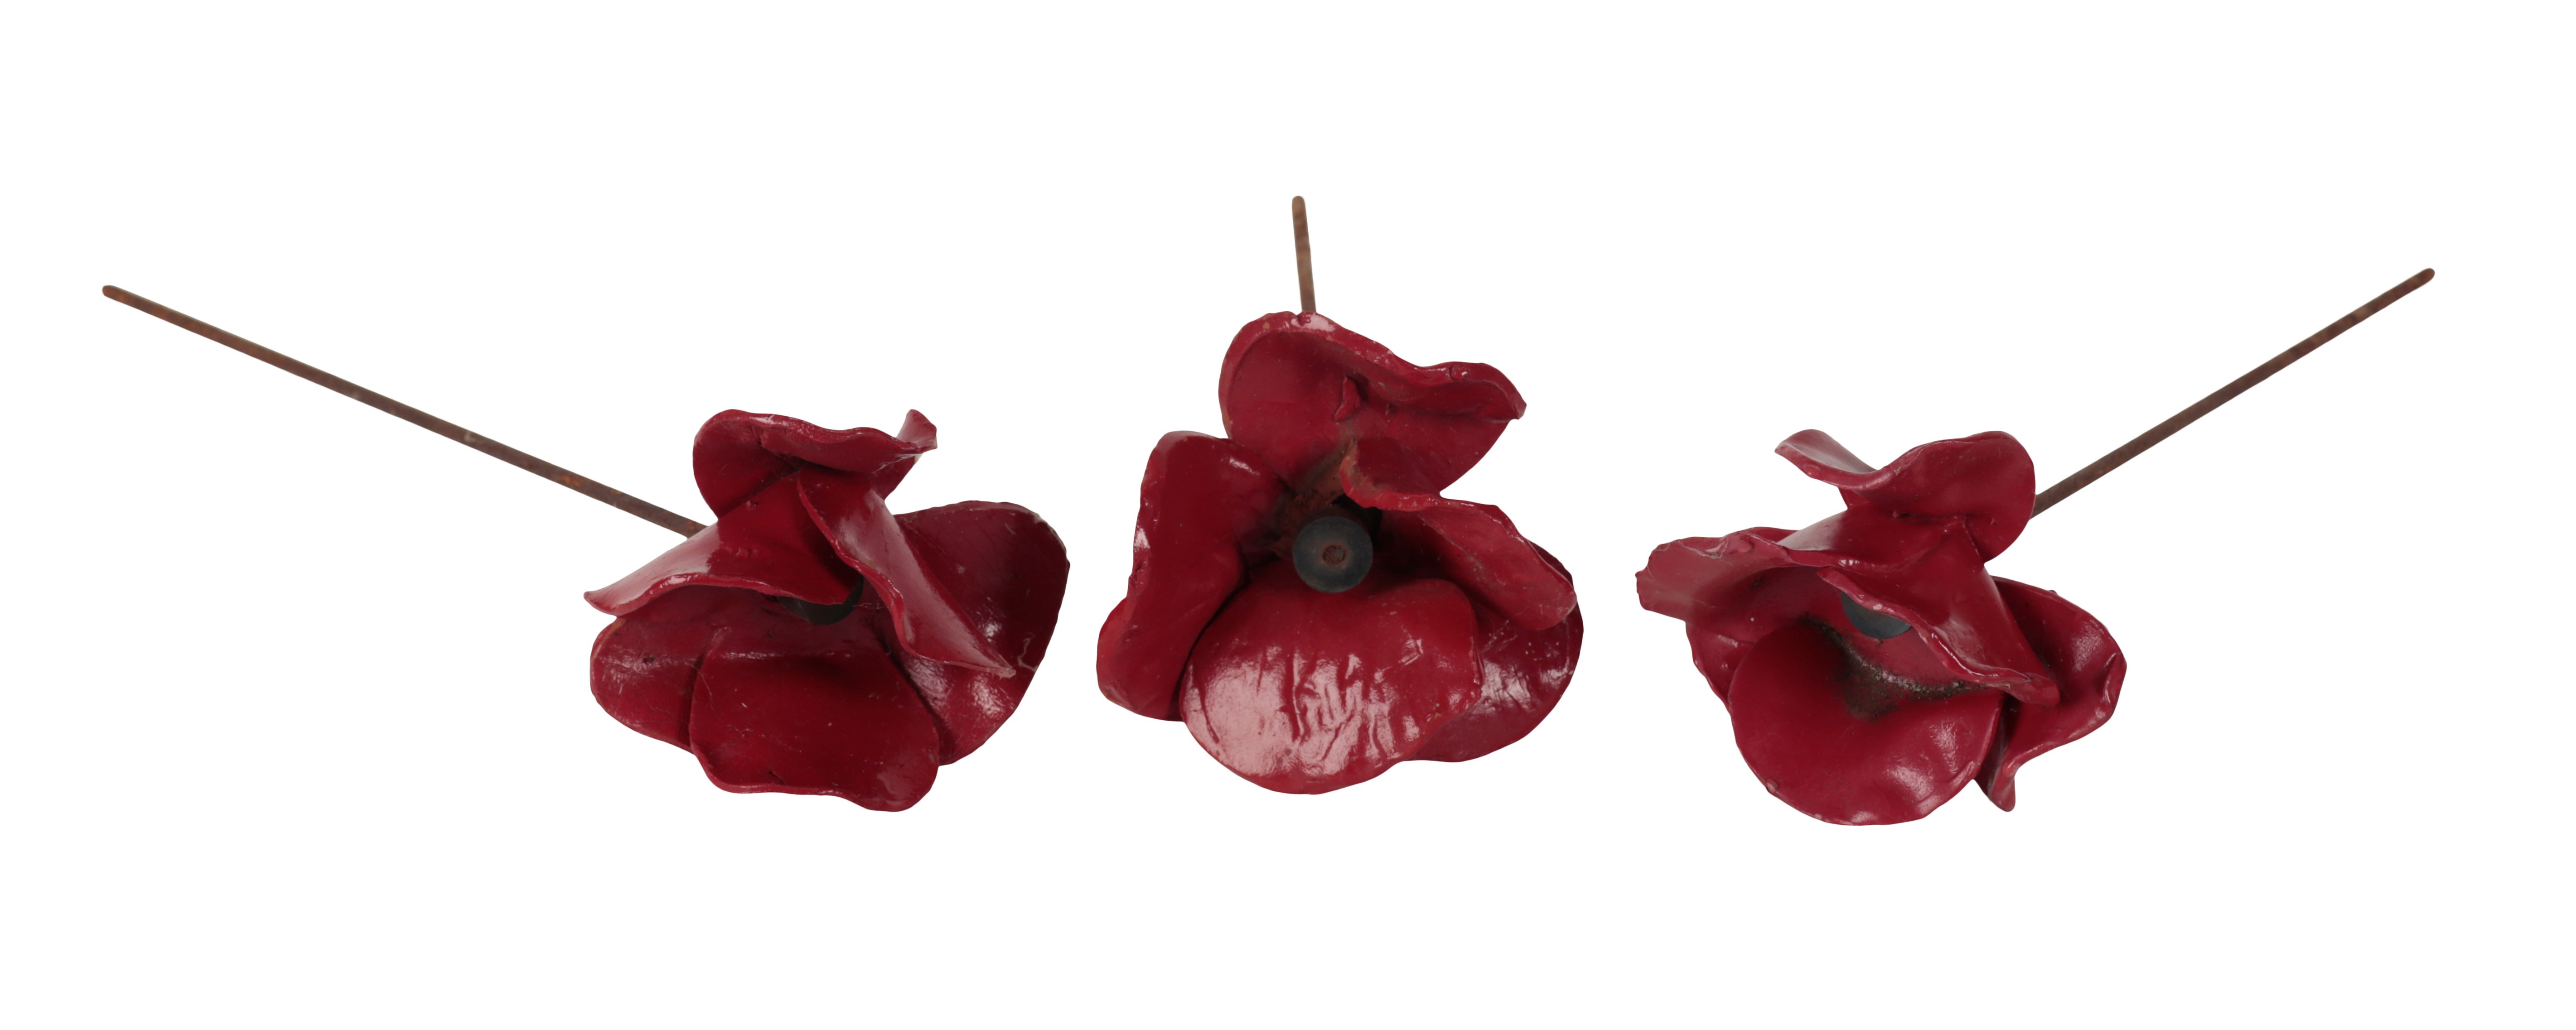 A COLLECTION OF CERAMIC POPPIES AFTER THOSE DESIGNED FOR THE TOWER OF LONDON BY PAUL CUMMINS